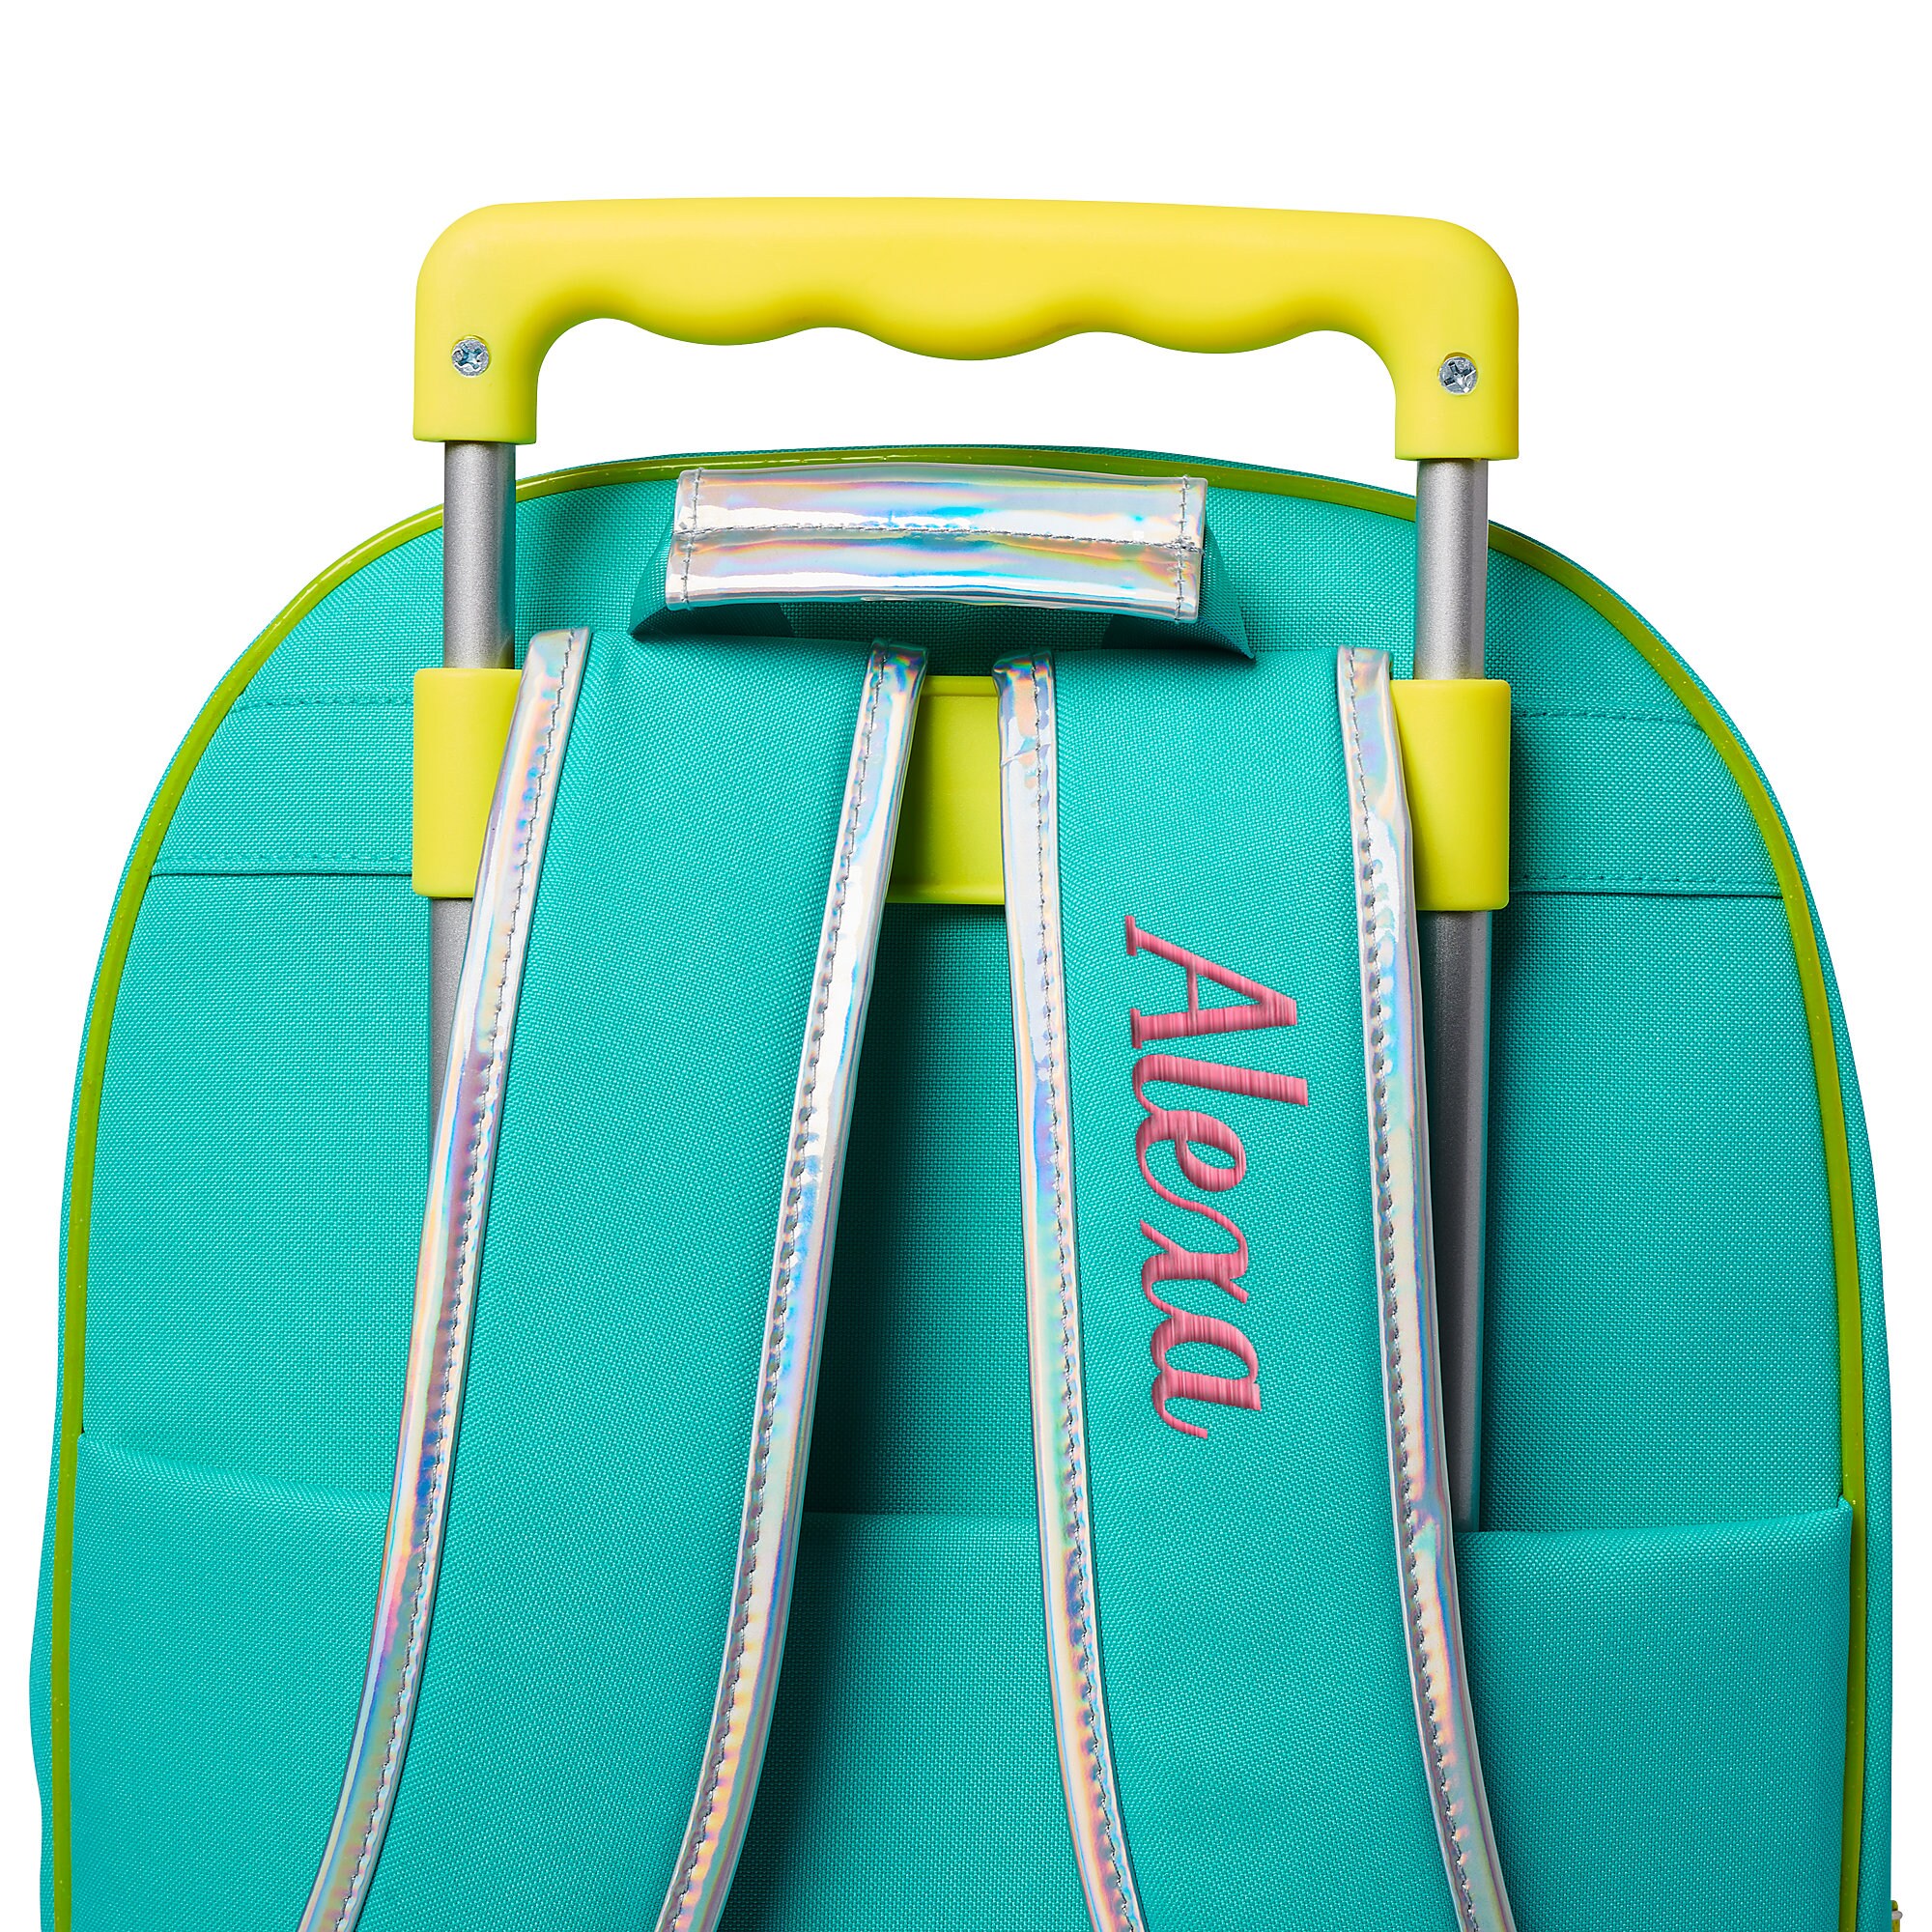 The Little Mermaid Rolling Backpack - Personalized